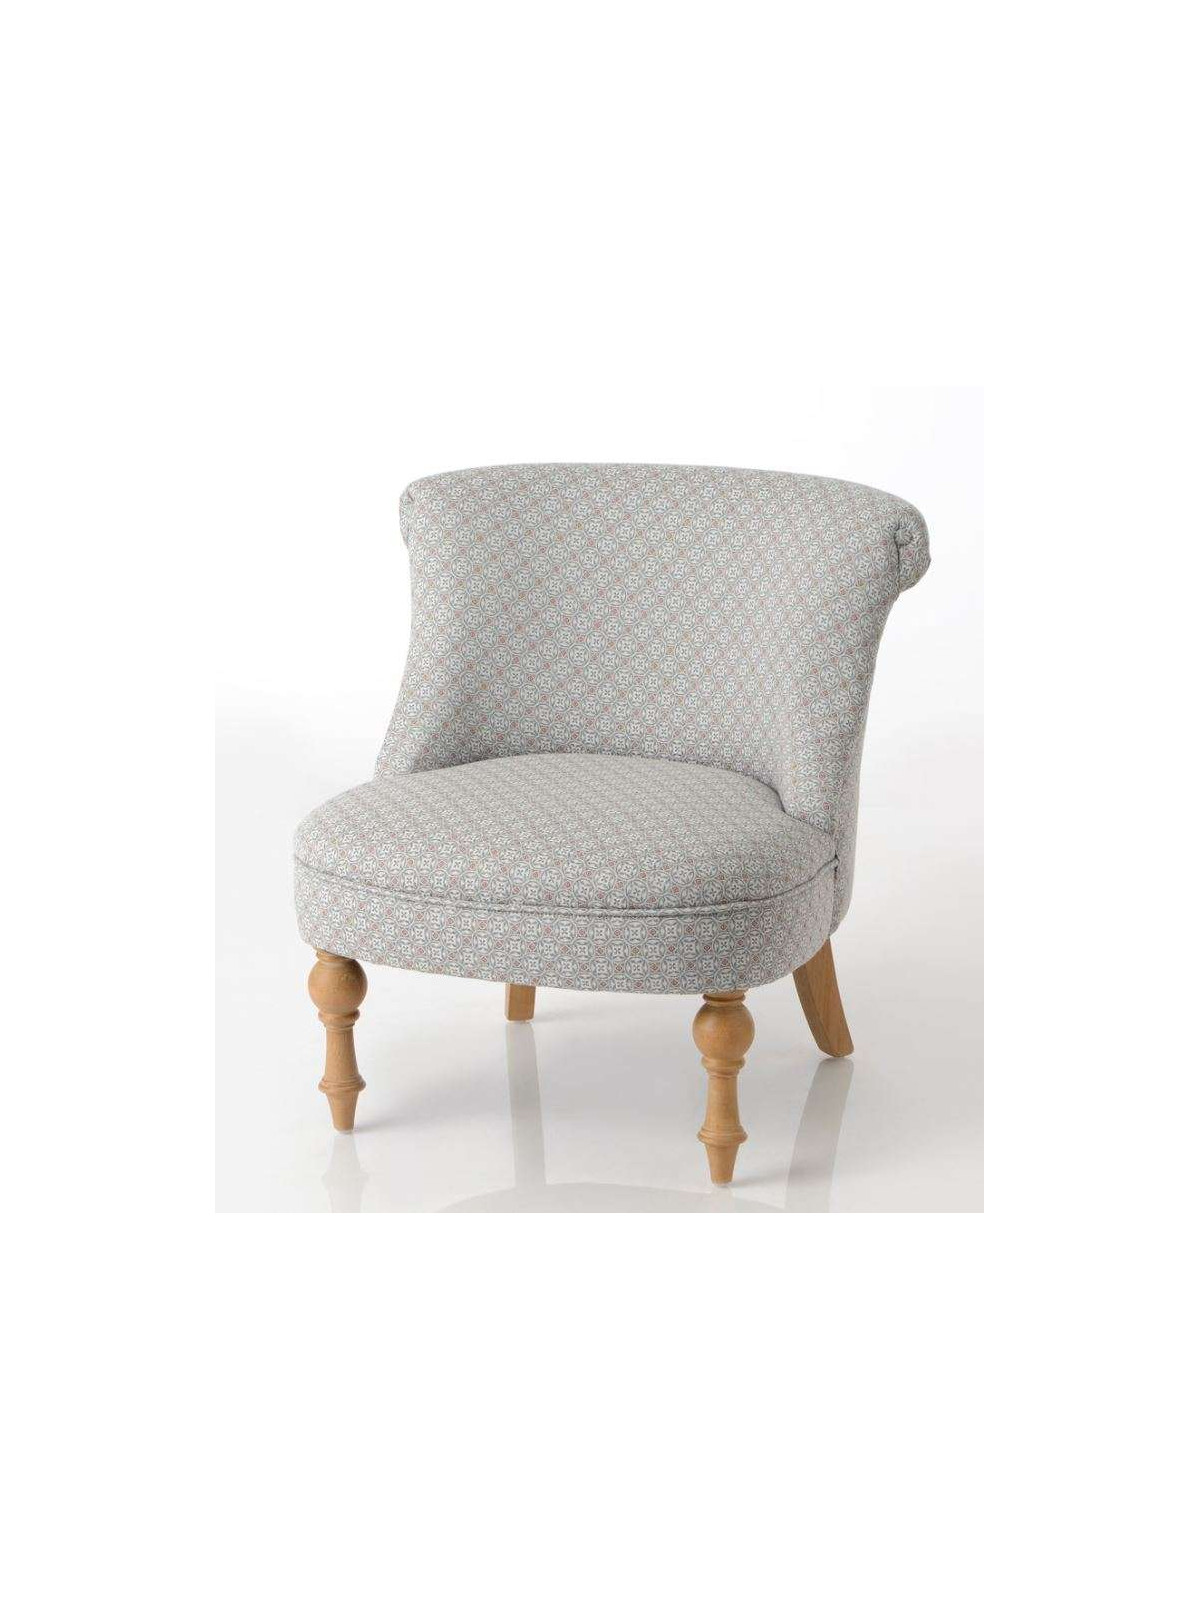 Fauteuil crapaud gris perle